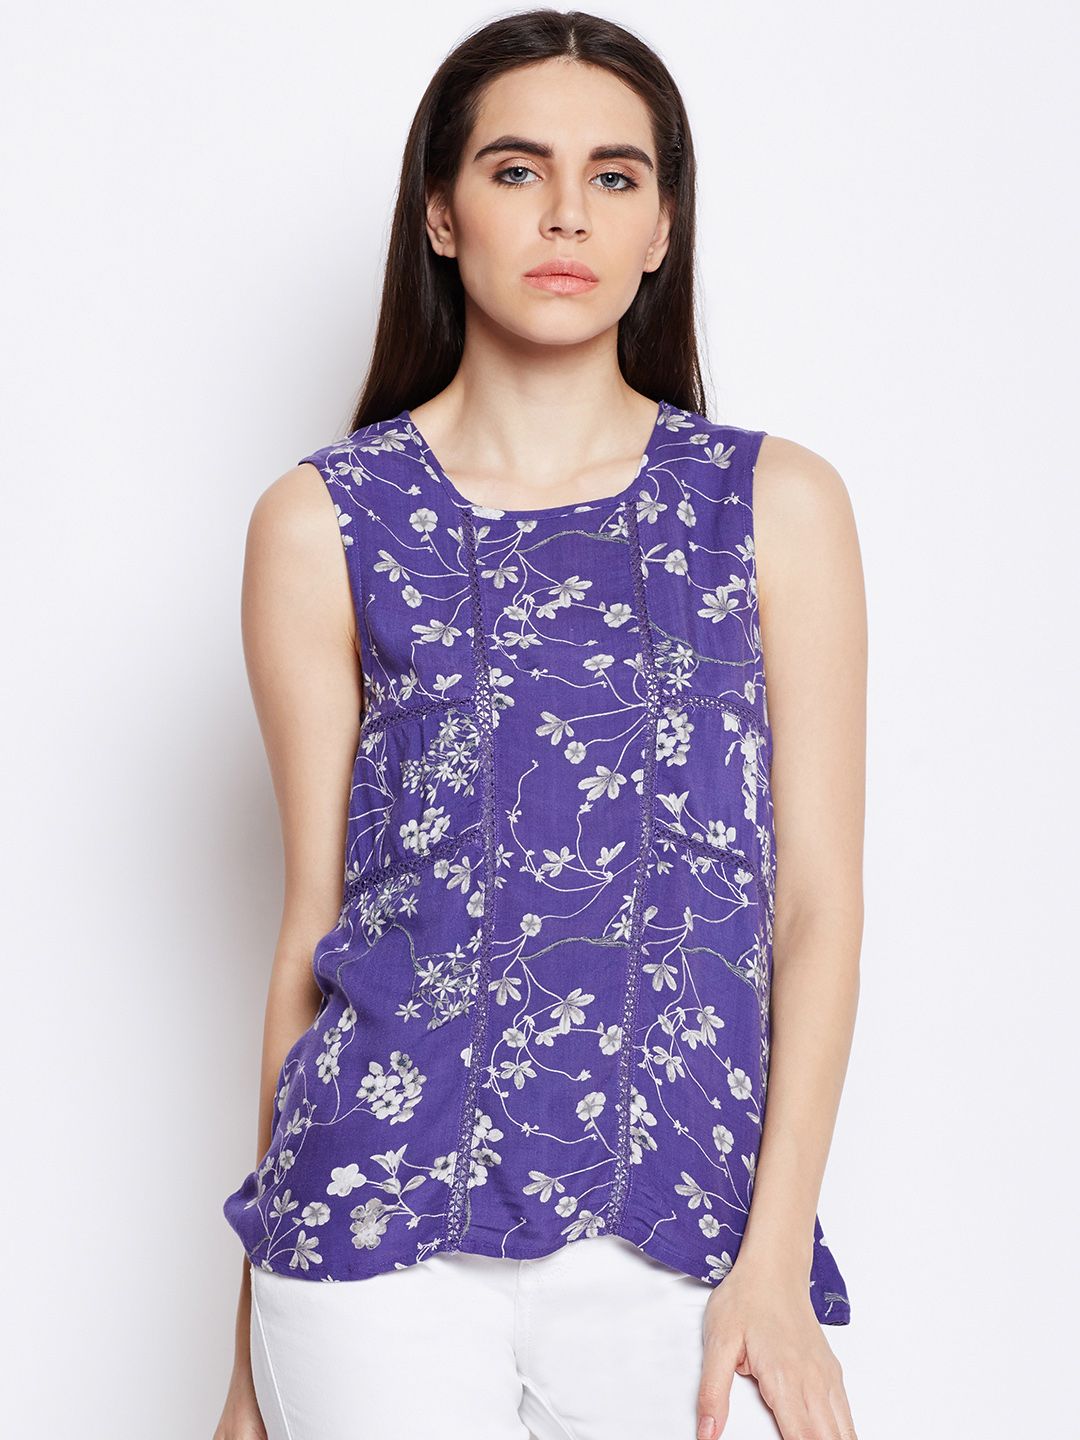 Oxolloxo Floral Lace Detail Sleeveless Ruffles Top Price in India